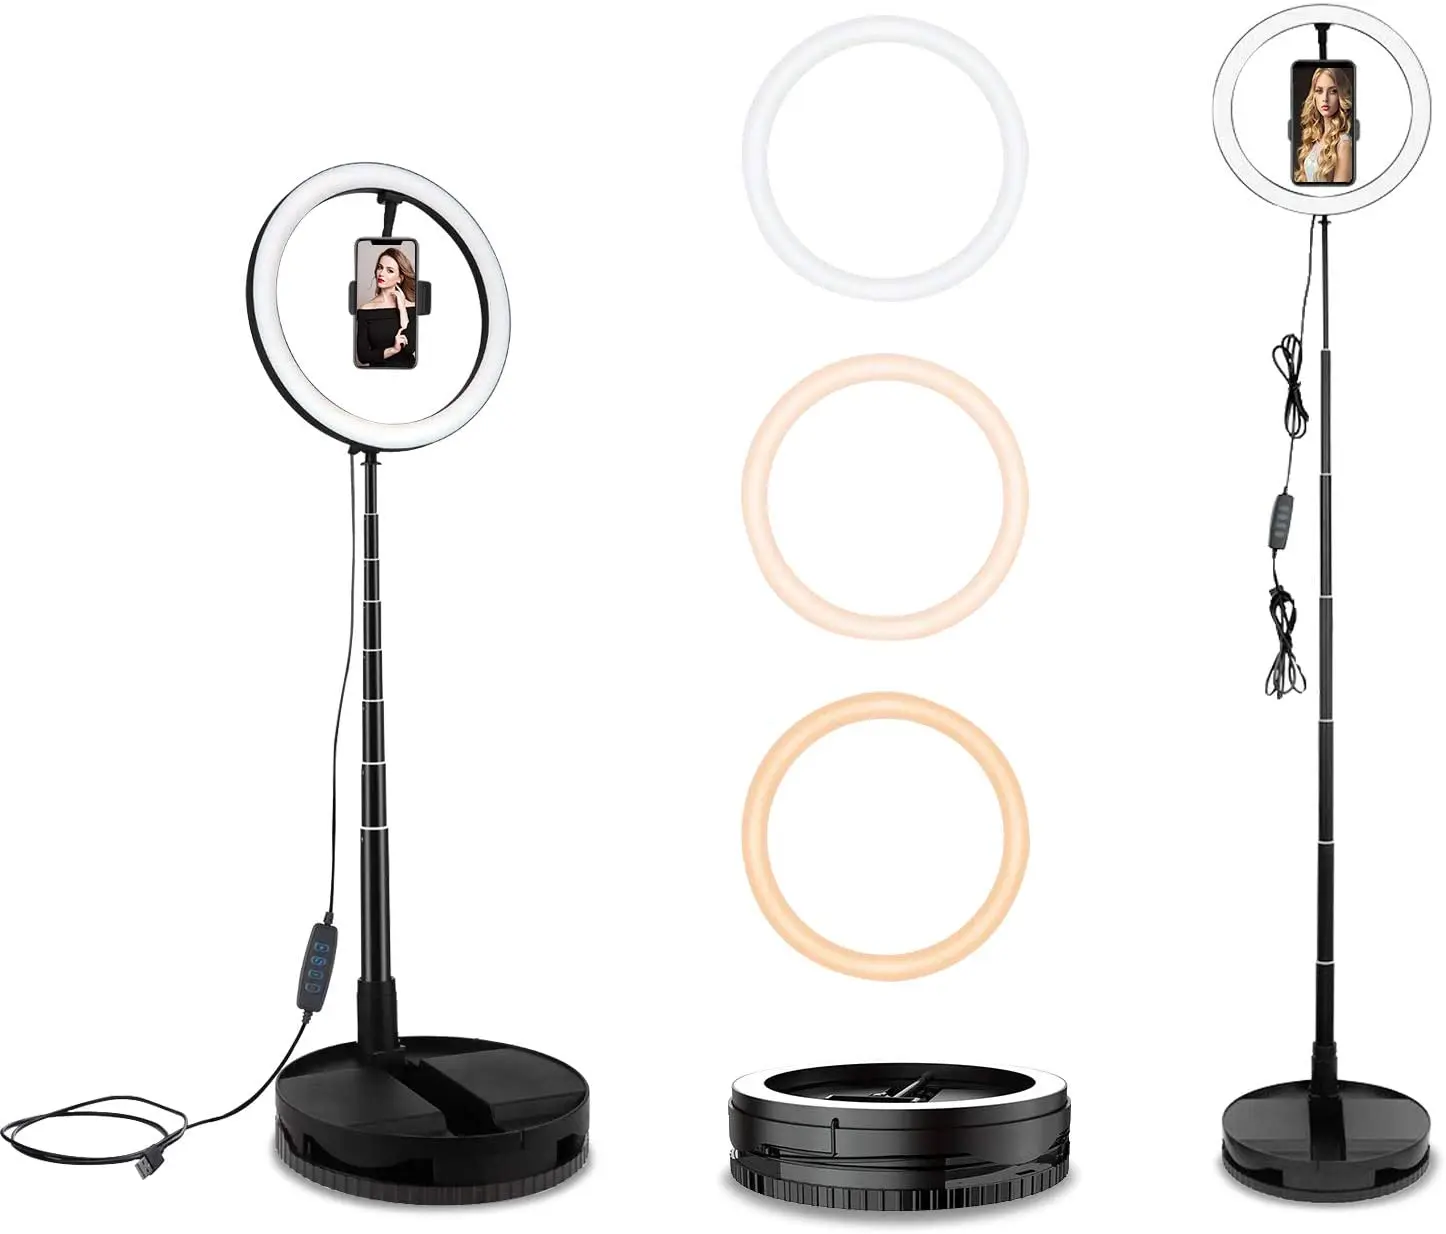 10 inch Portable Foldable Makeup Desk Fill 265*265*66MM Stretchable Selfie Light Ring with Phone Holder and Lamp Stand